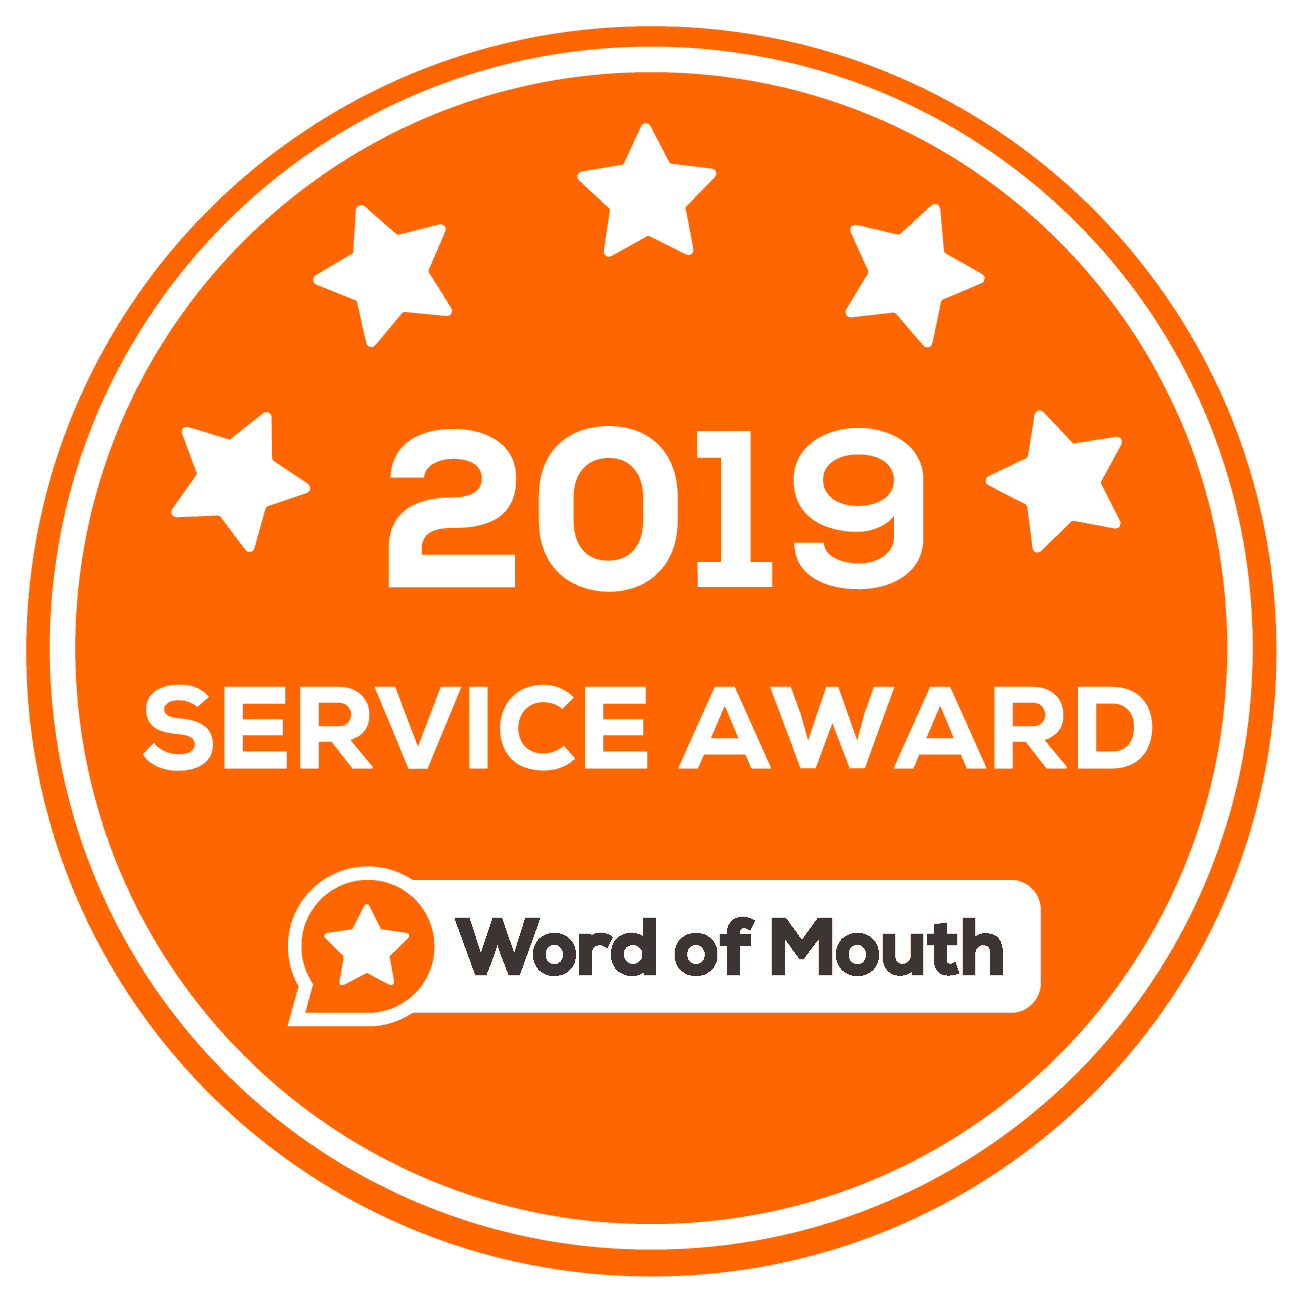 Word of Mouth 2019 Service Award sticker